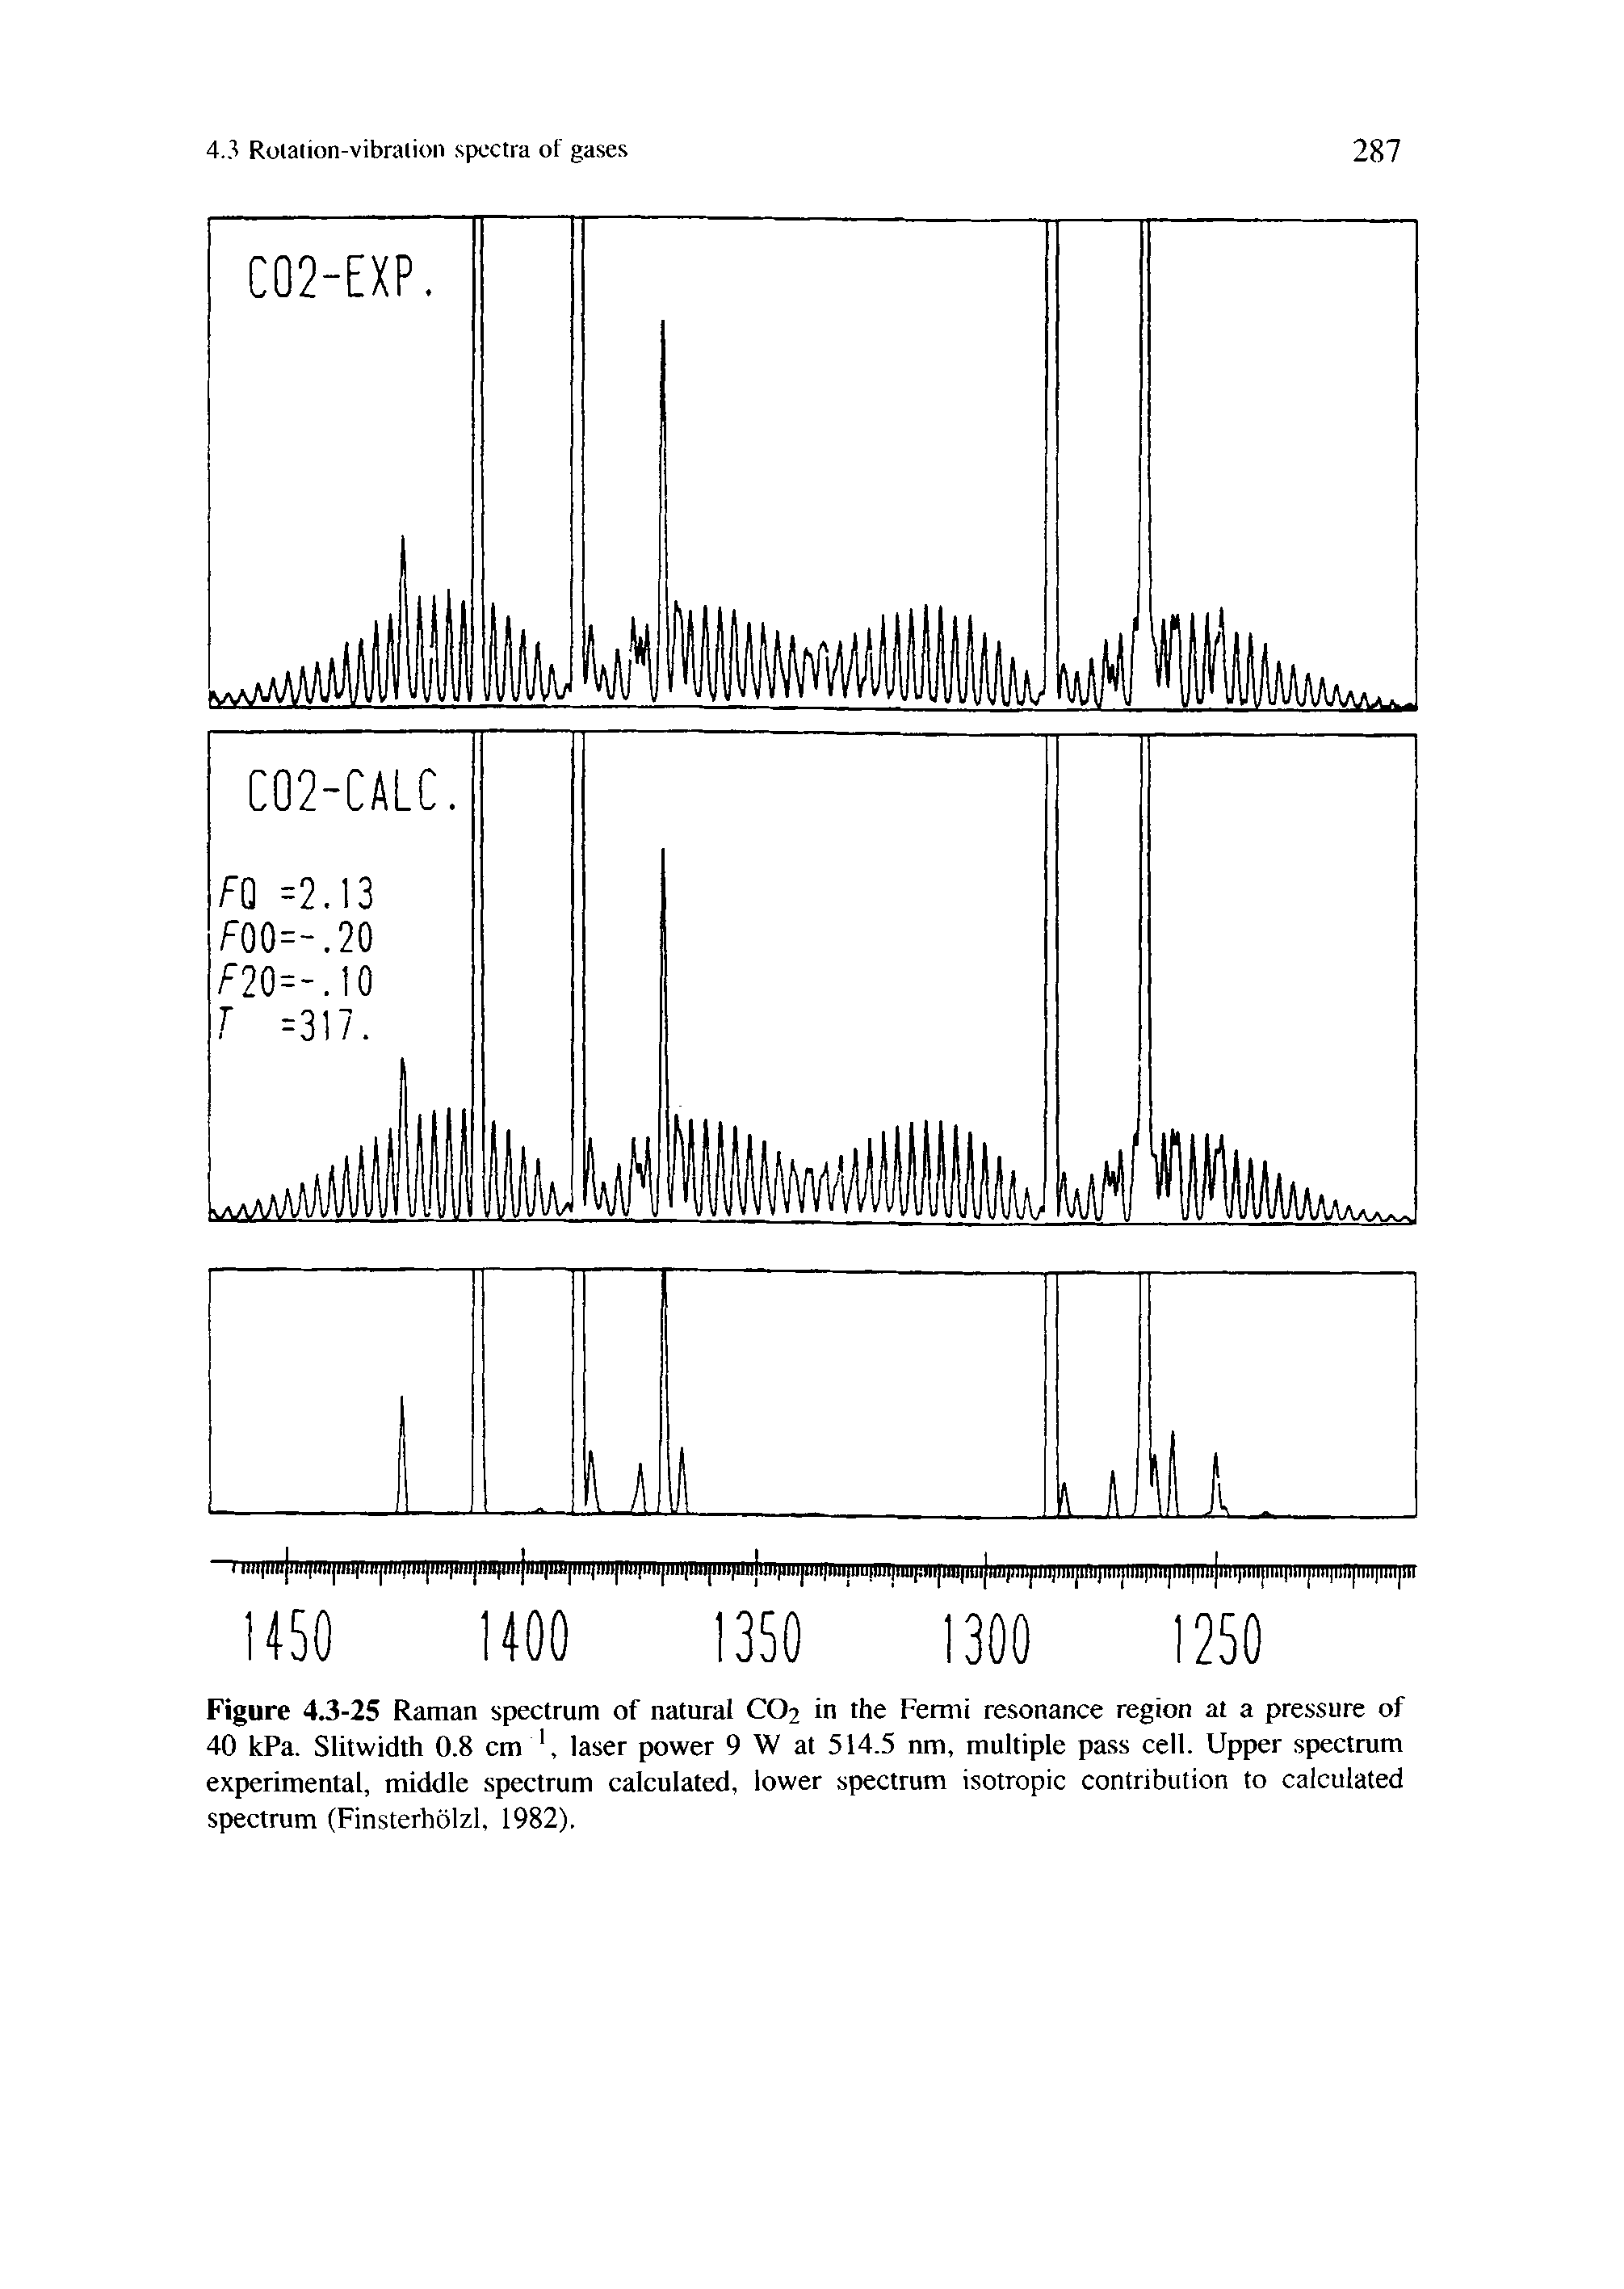 Figure 4.3-25 Raman spectrum of natural CO2 in the Fermi resonance region at a pressure of 40 kPa. Slitwidth 0.8 cm laser power 9 W at 514.5 nm, multiple pass cell. Upper spectrum experimental, middle spectrum calculated, lower spectrum isotropic contribution to calculated spectrum (Finsterholzl, 1982),...